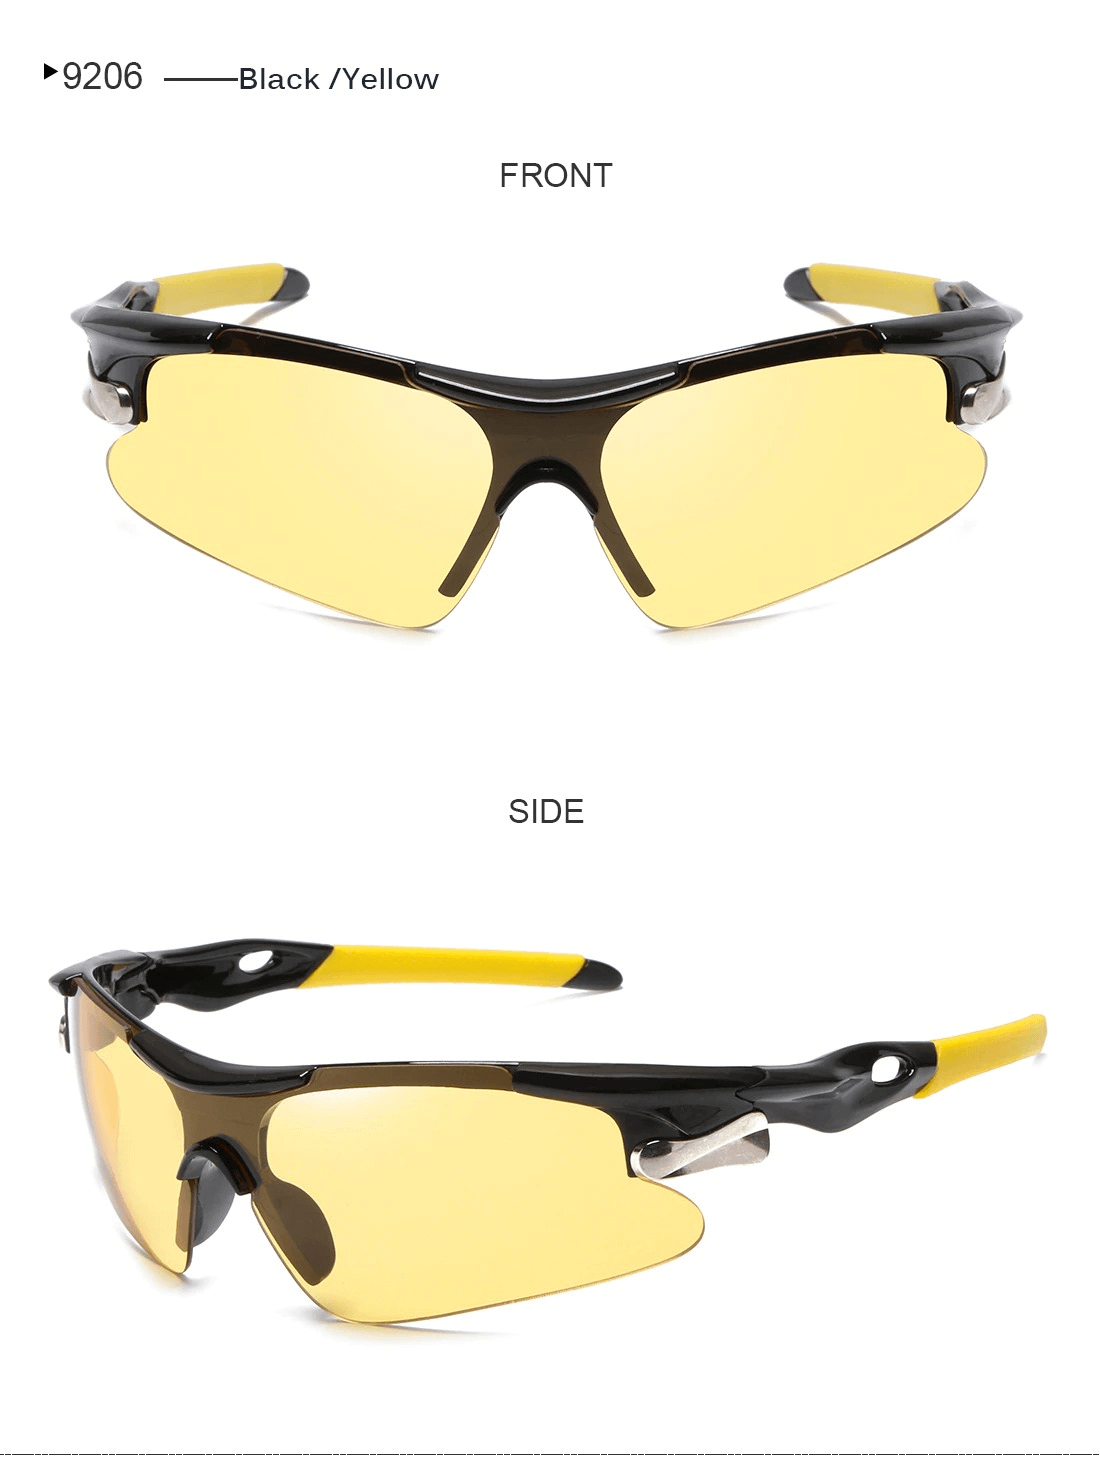 Cycling Polarized Lens Outdoor Sunglasses for Men and Women - SF0205